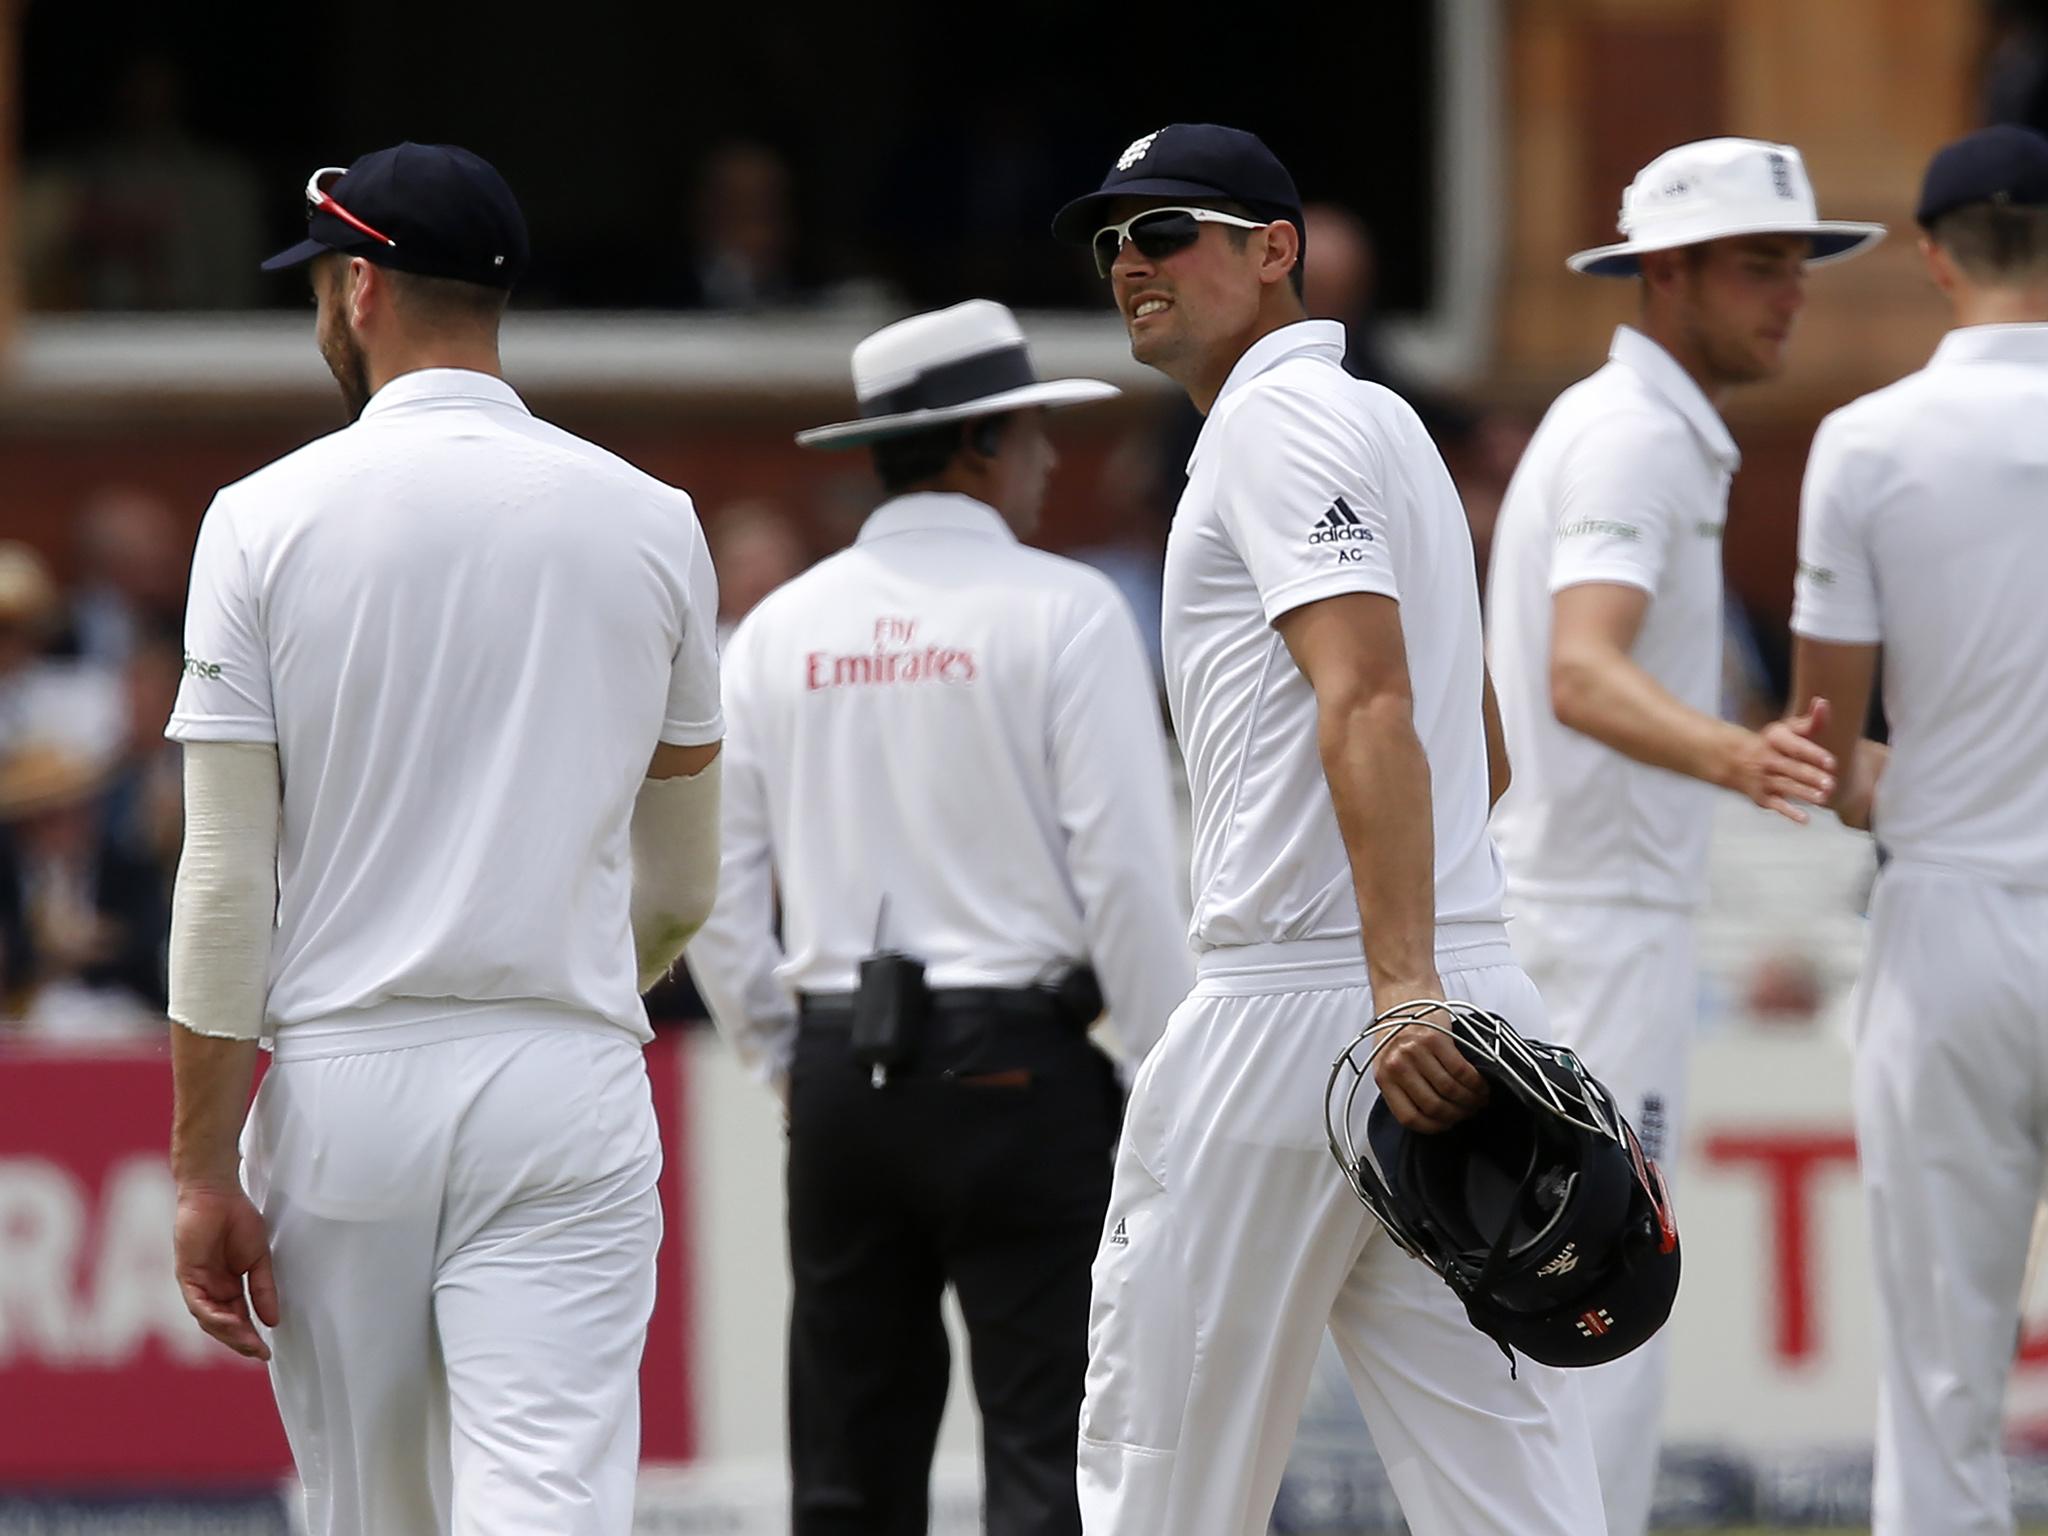 Cook was absent from England's top order as he had an x-ray on his left knee